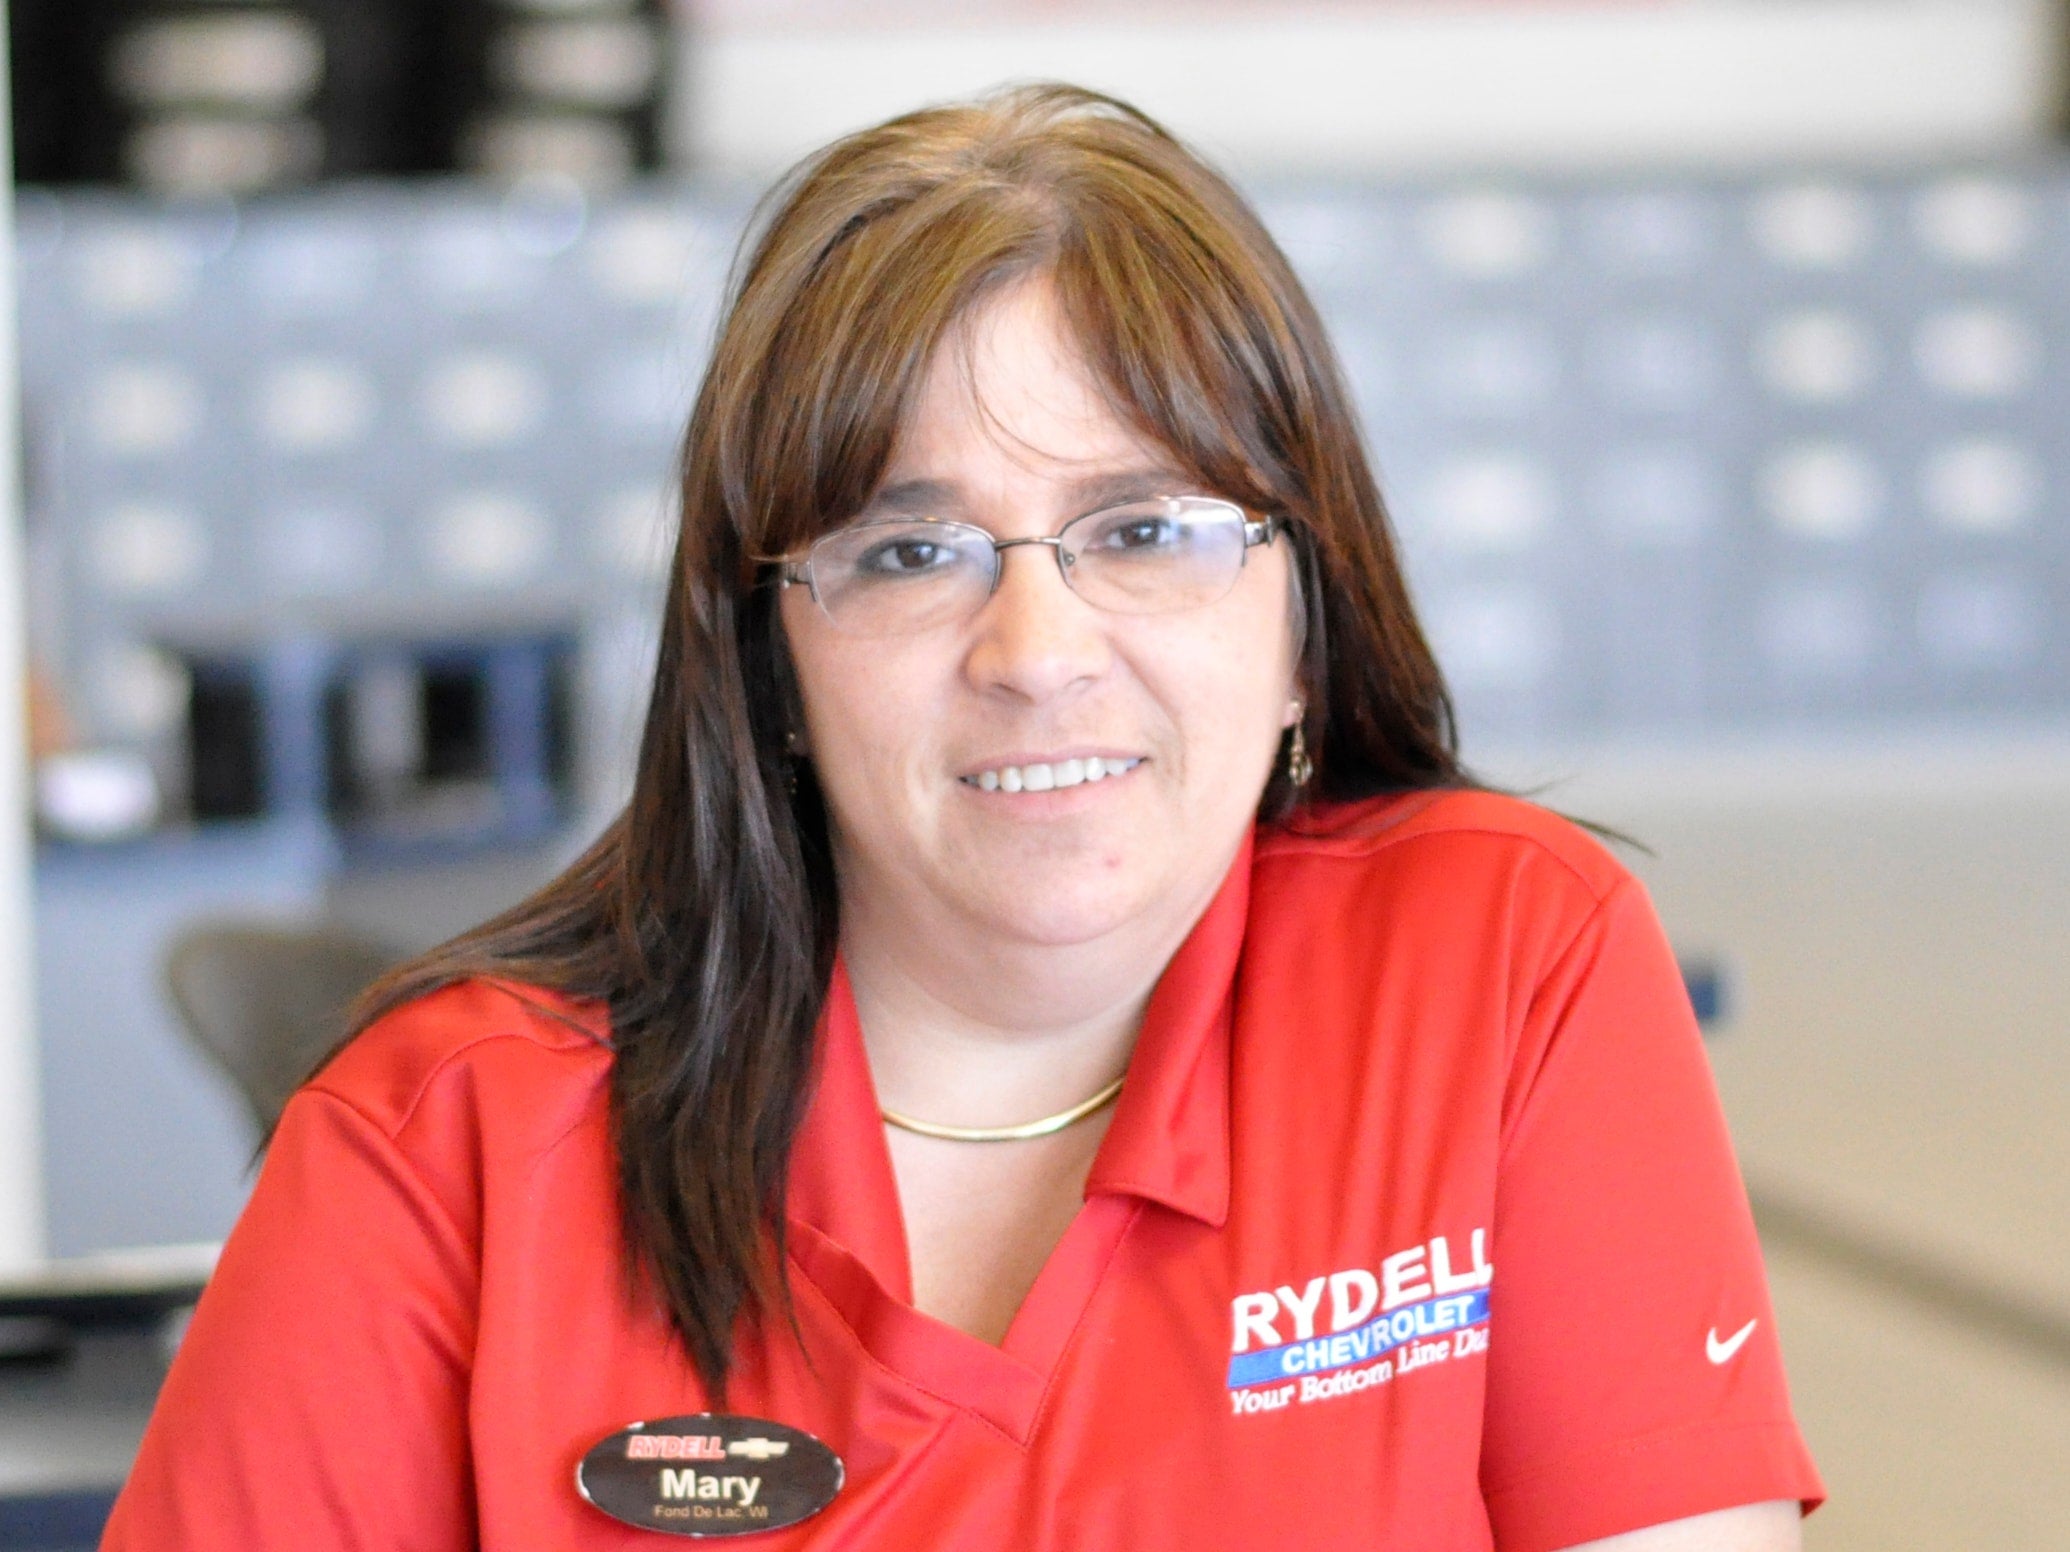 Mary Kuechenberg at Rydell Auto in Waterloo IA